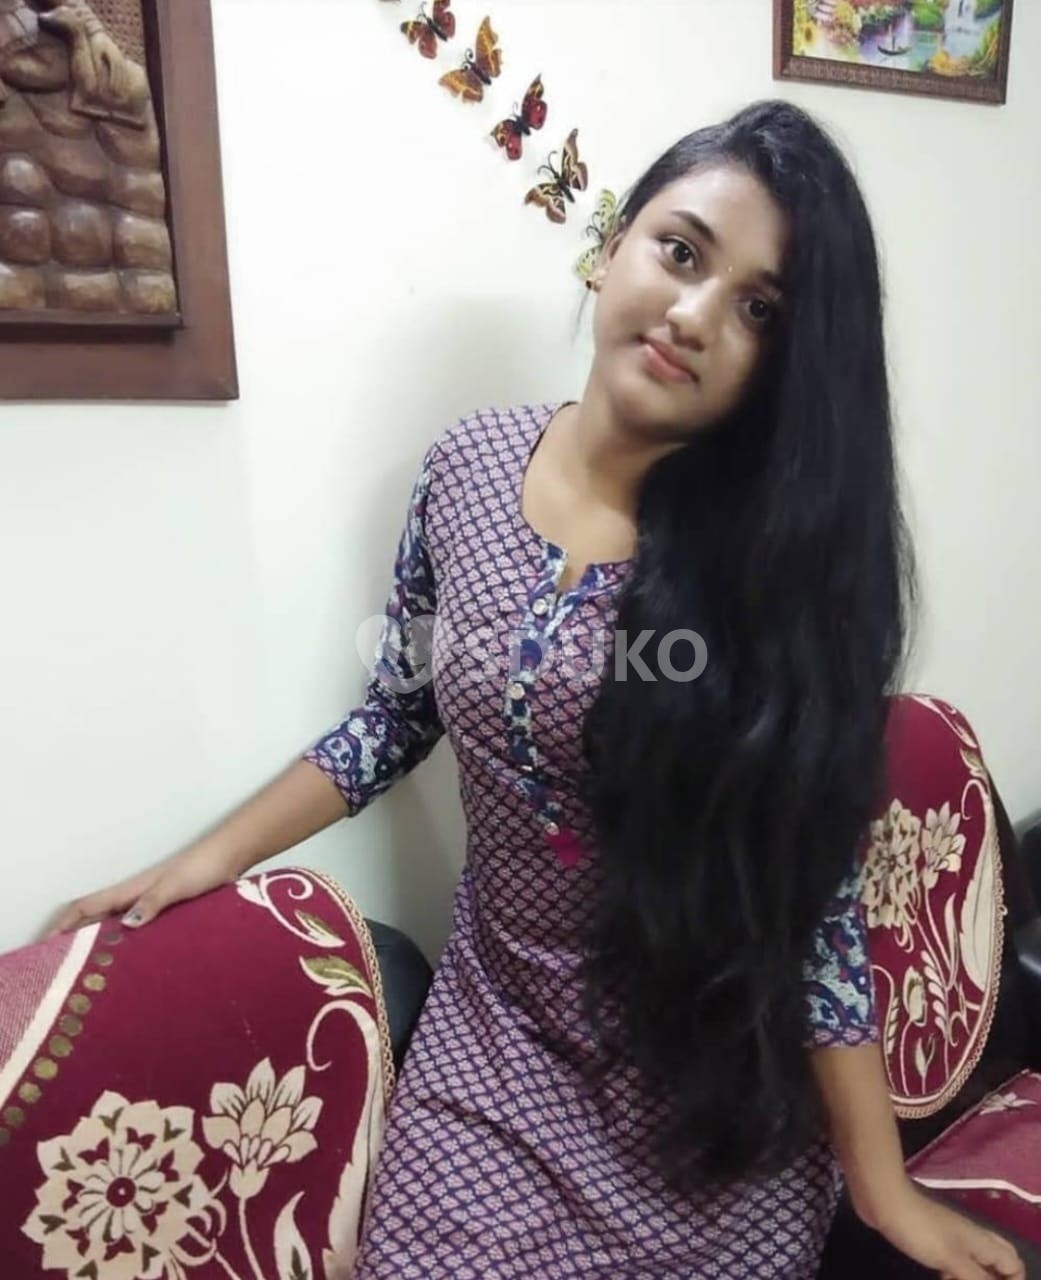 Mangalore *____MY SELF DIVYA UNLIMITED SEX CUTE BEST SERVICE AND 24 HR AVAILABLE.